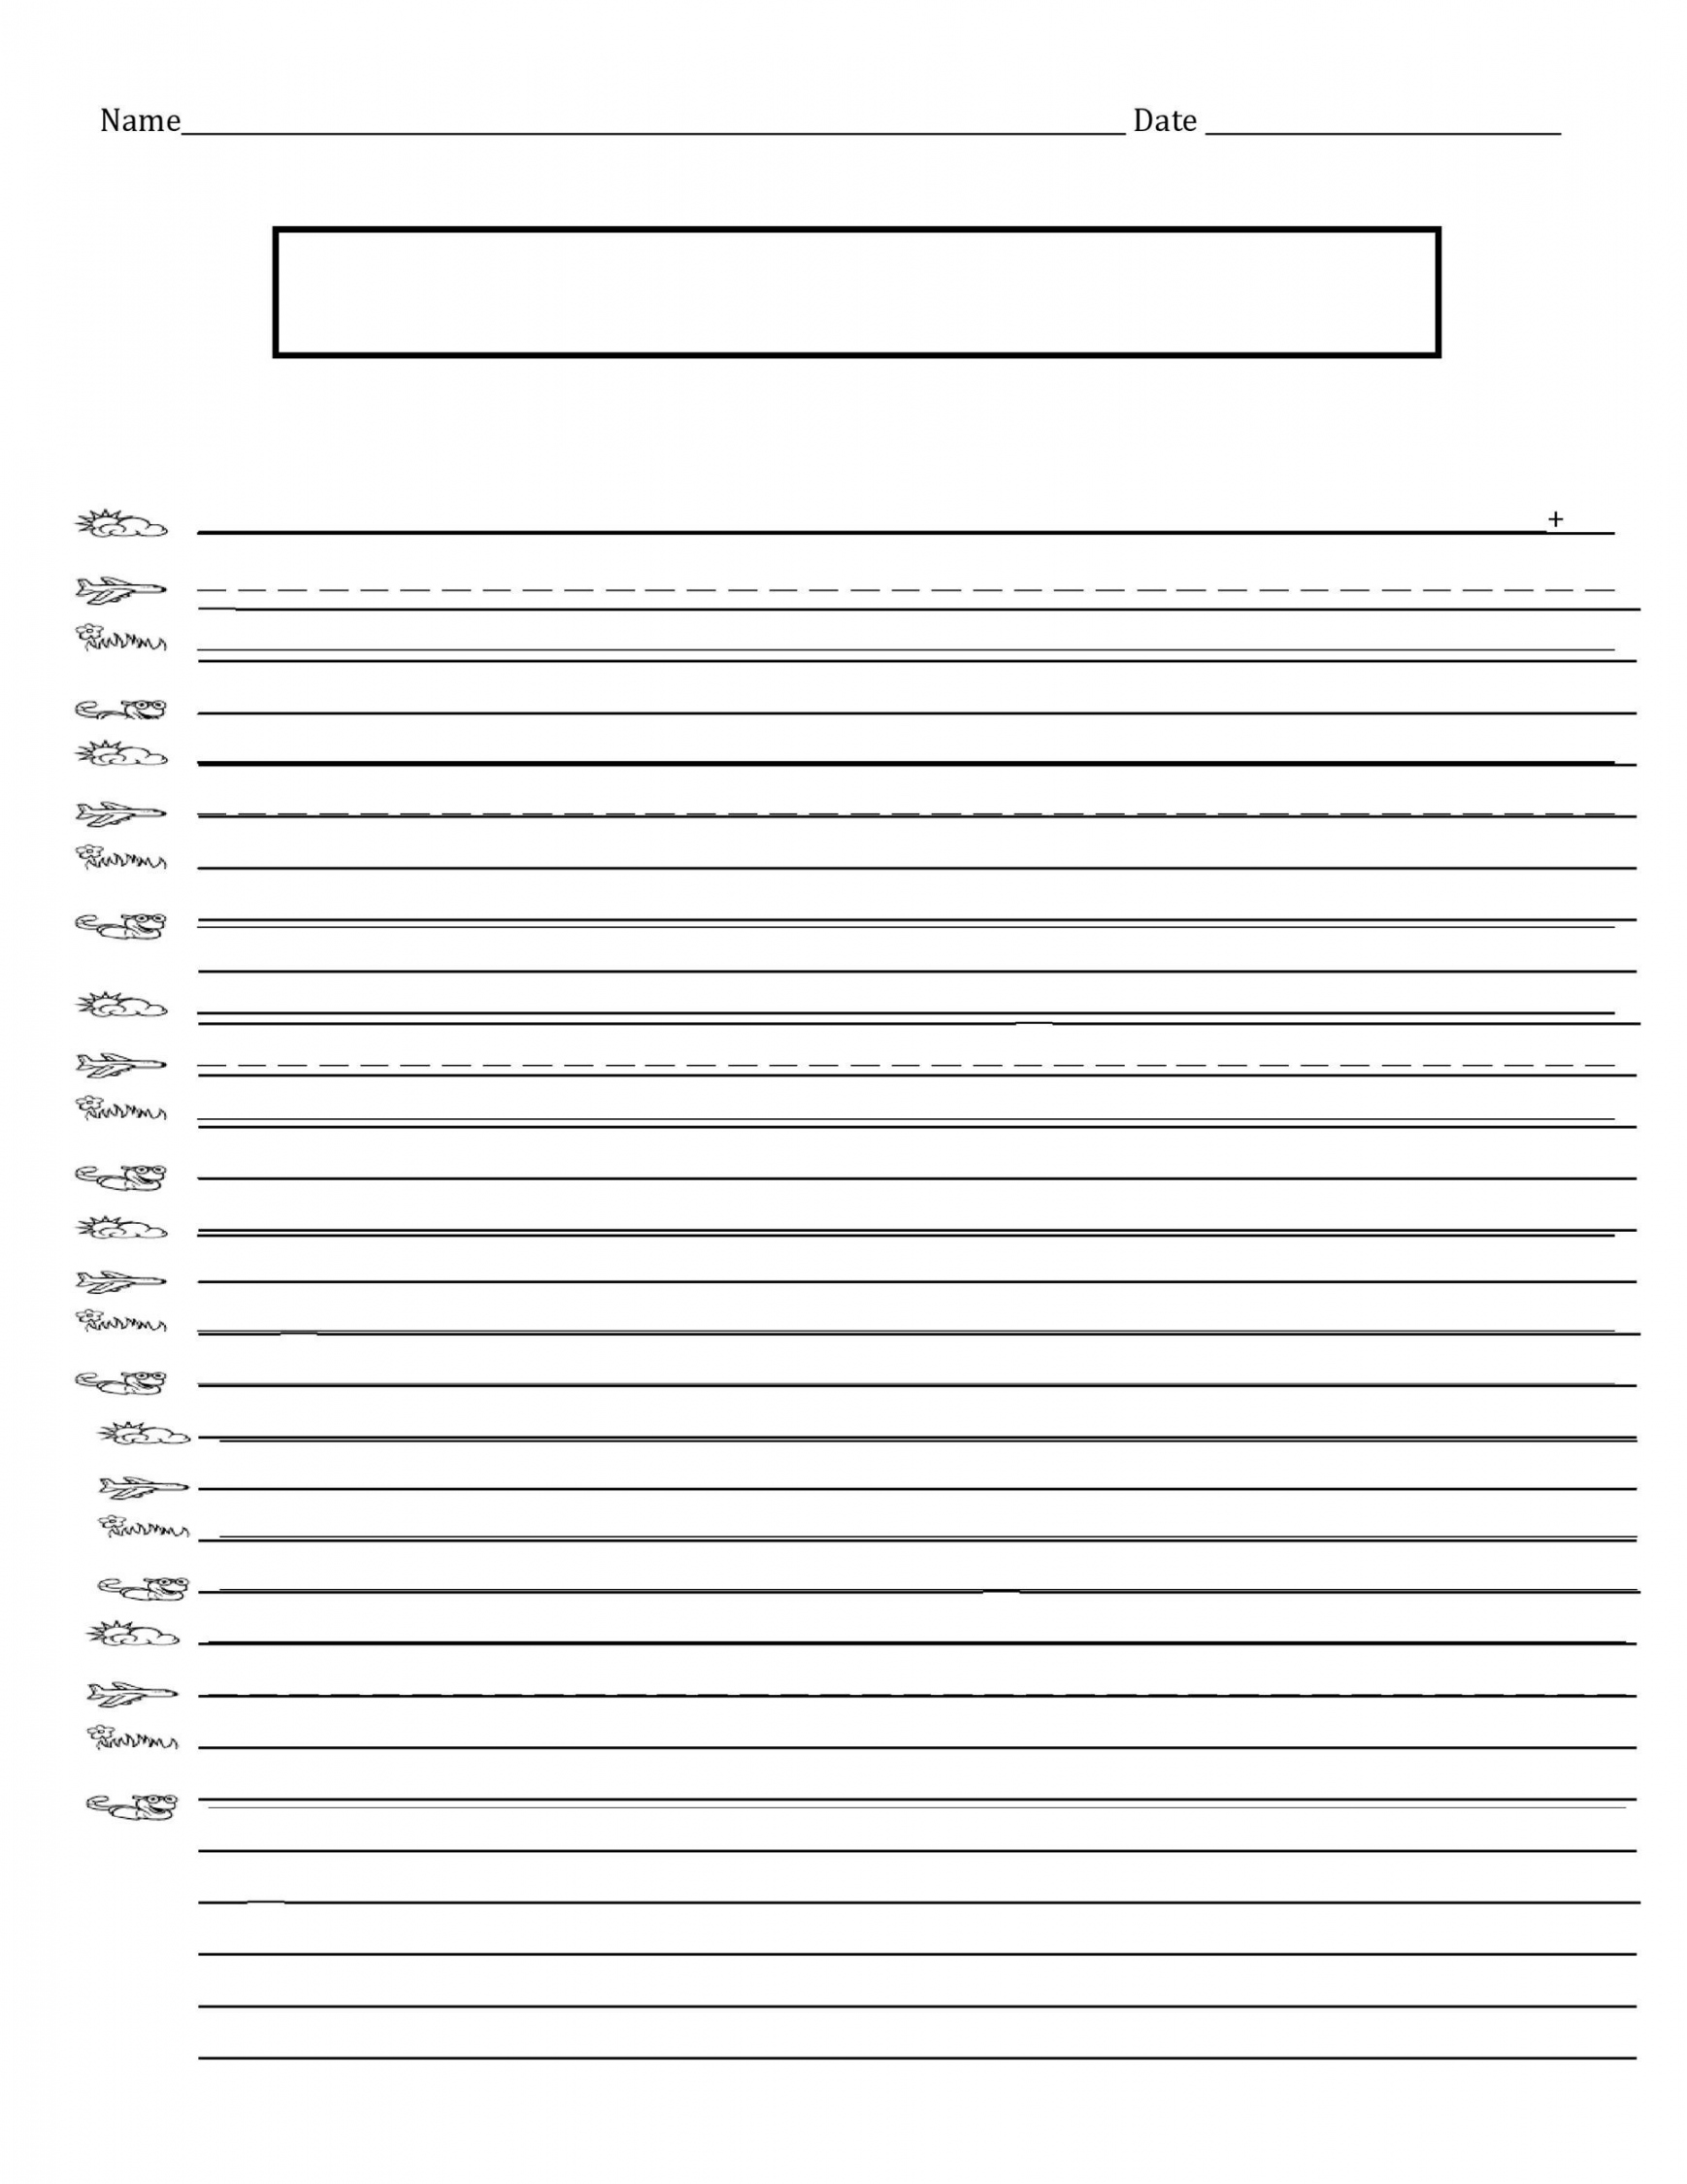 Printable Lined Paper Templates ᐅ TemplateLab - FREE Printables - Lined Paper Print Out